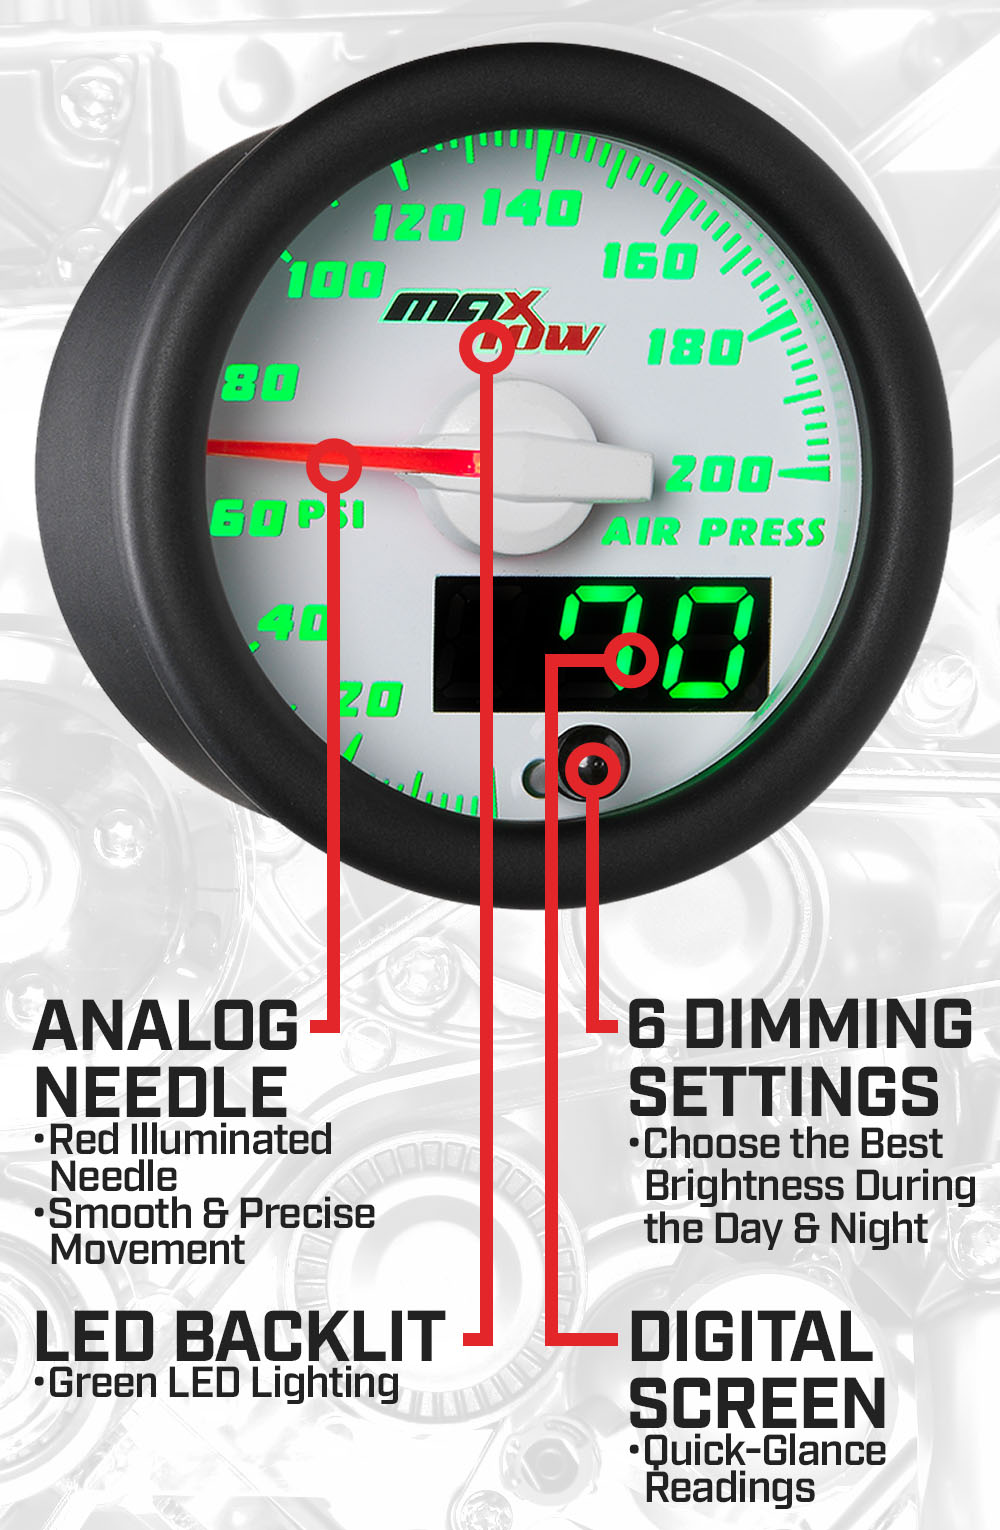 White & Green Double Vision Air Pressure Gauge Features